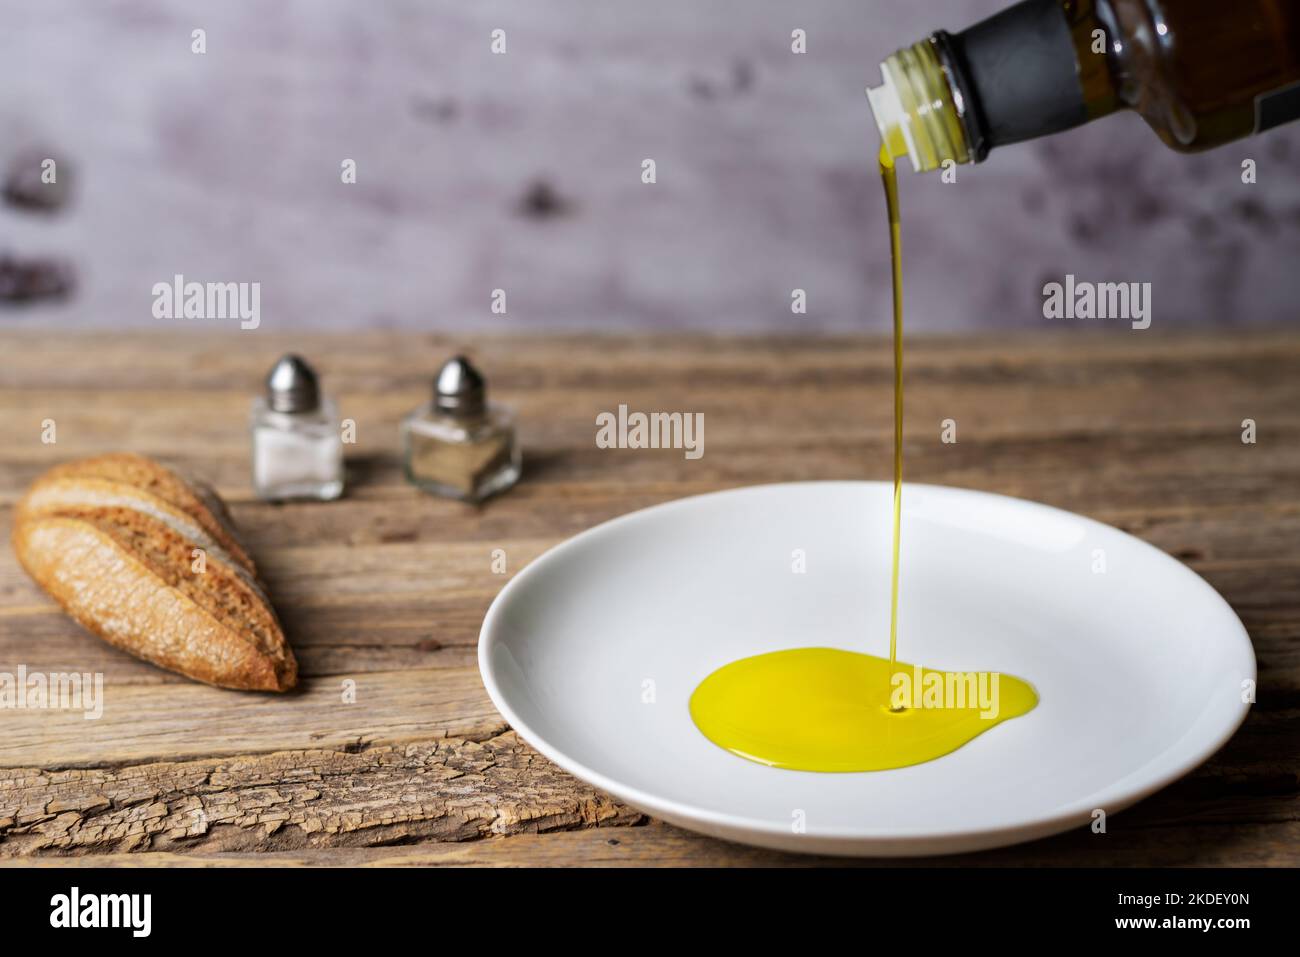 Extra virgin olive oil pouring from a bottle to a round white plate, on a rustic wooden table. Stock Photo